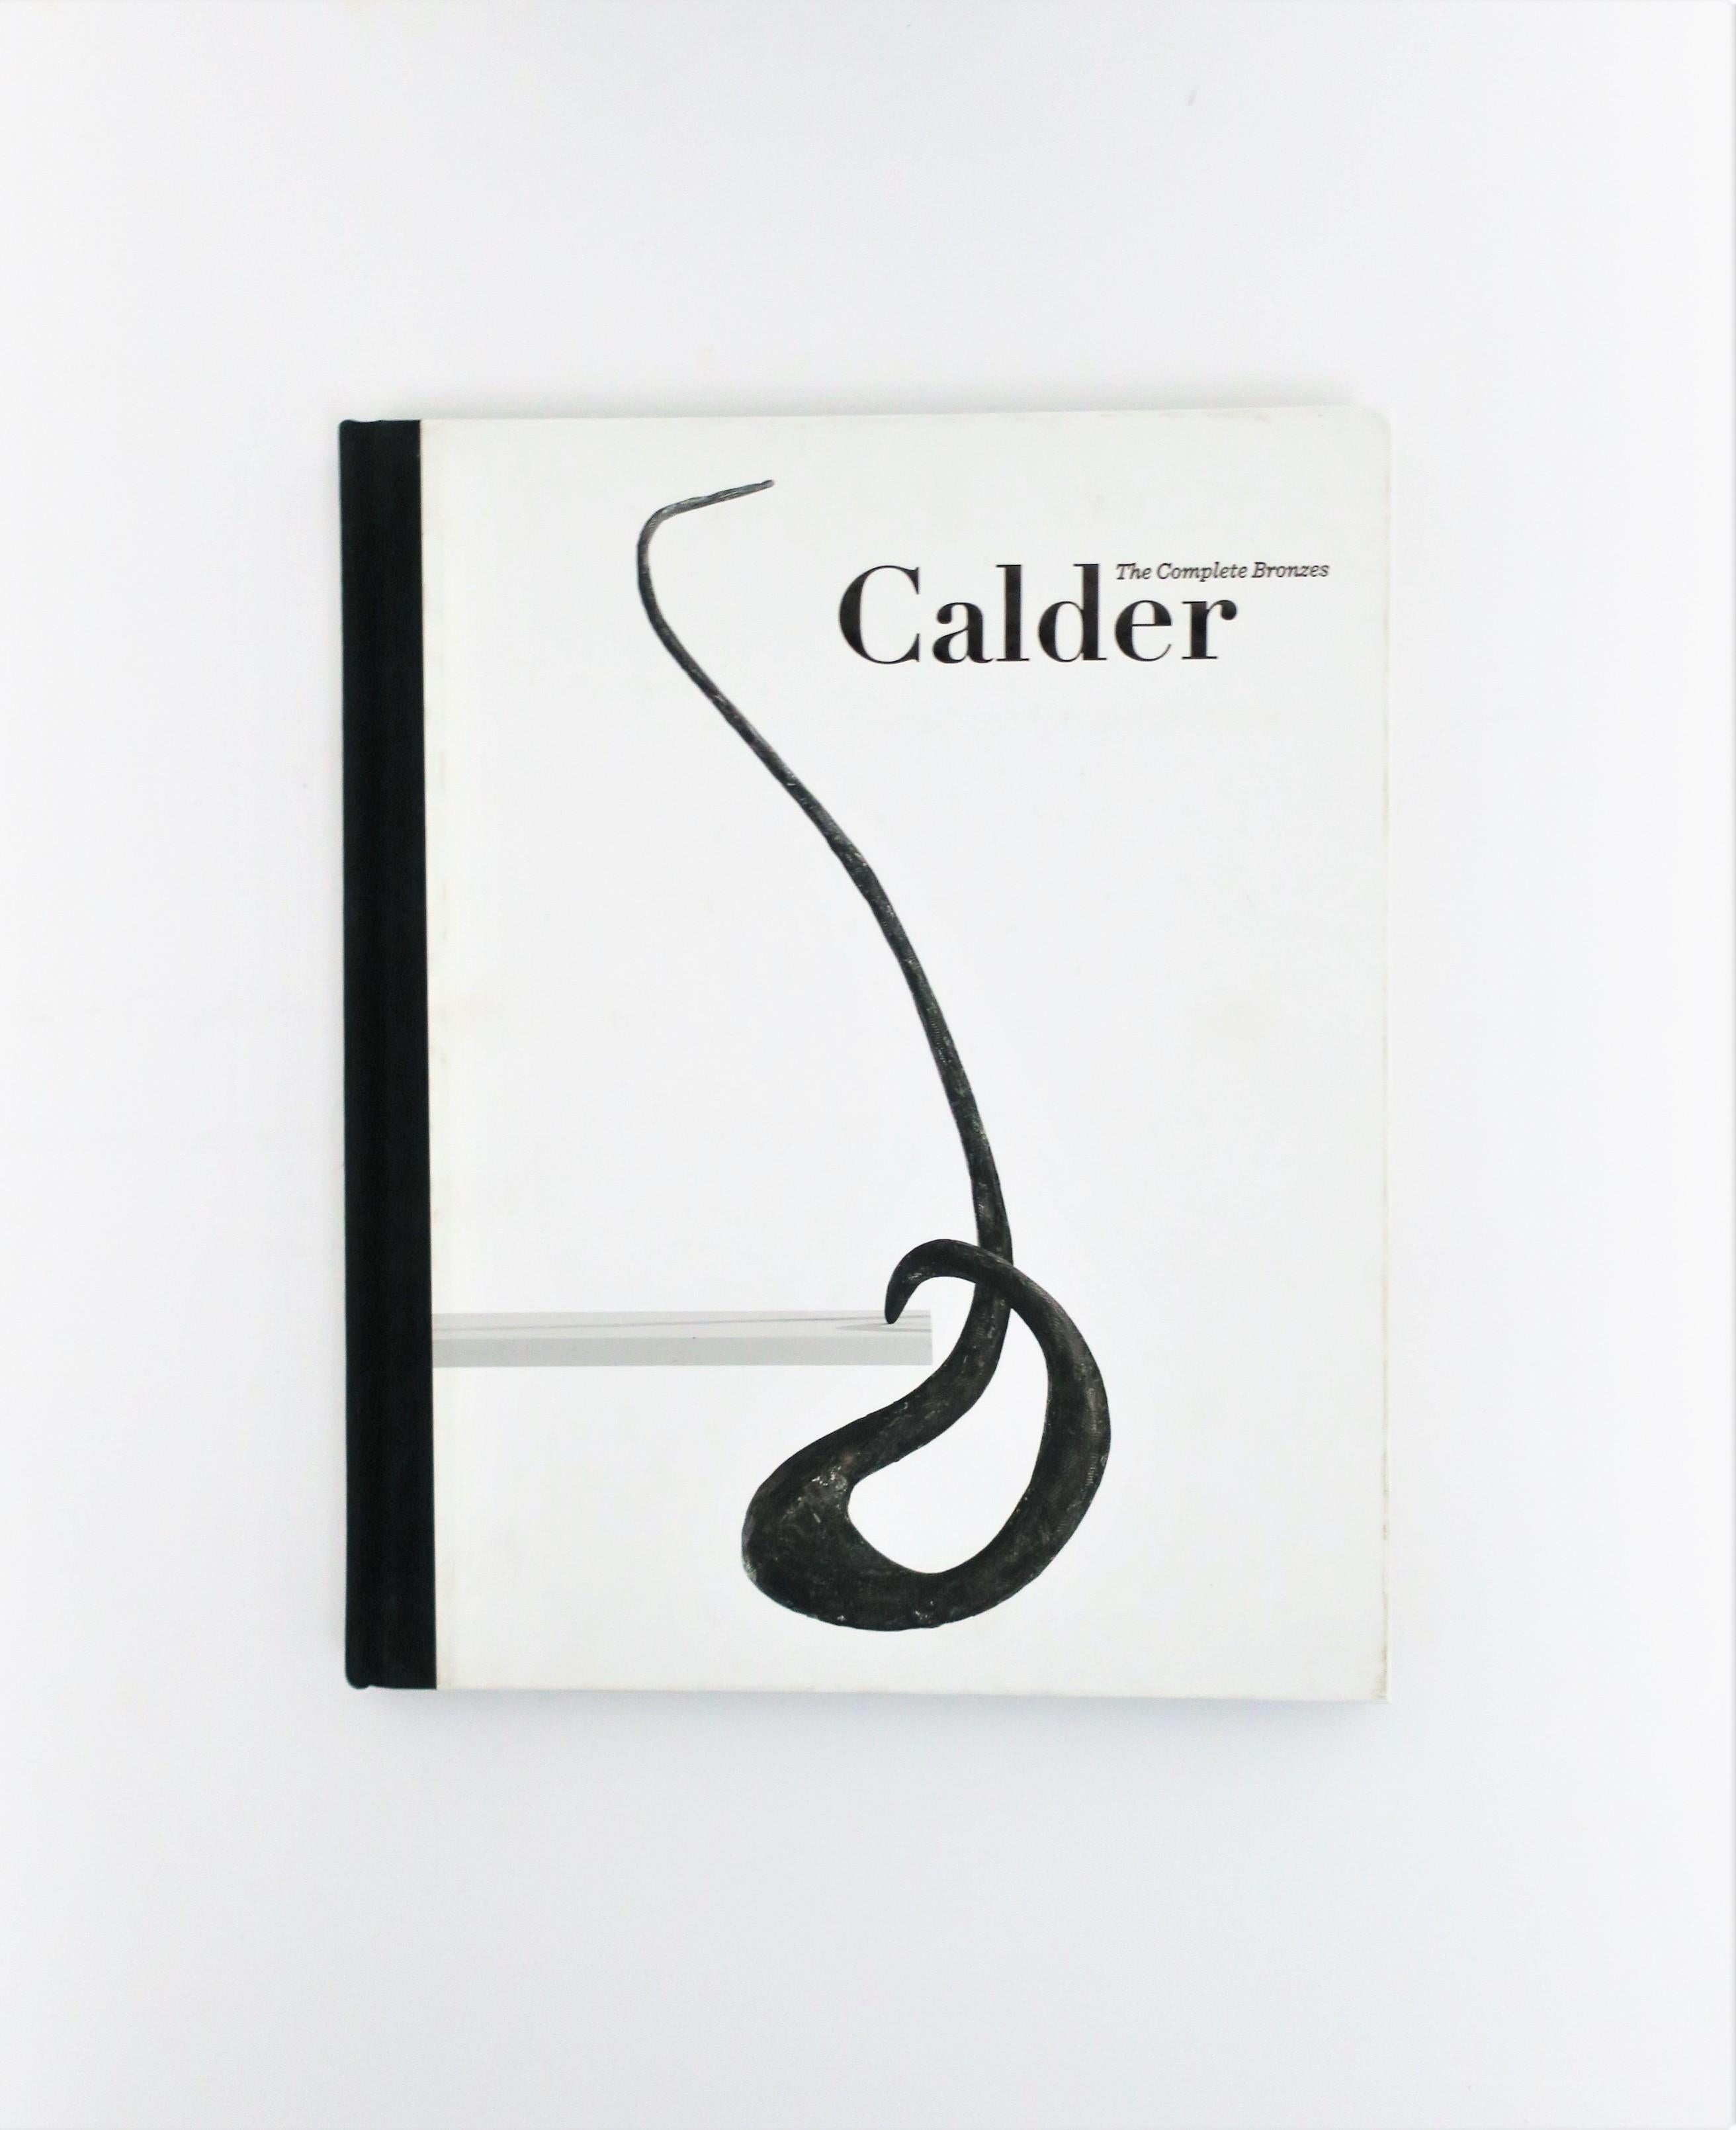 Calder: The Complete Bronzes book. Published on the occasion of the exhibition; October 25 - December 8, 2012, New York, New York. This exhibition book is a great addition to a collection, an office, library, coffee table, etc. Books' dimensions: